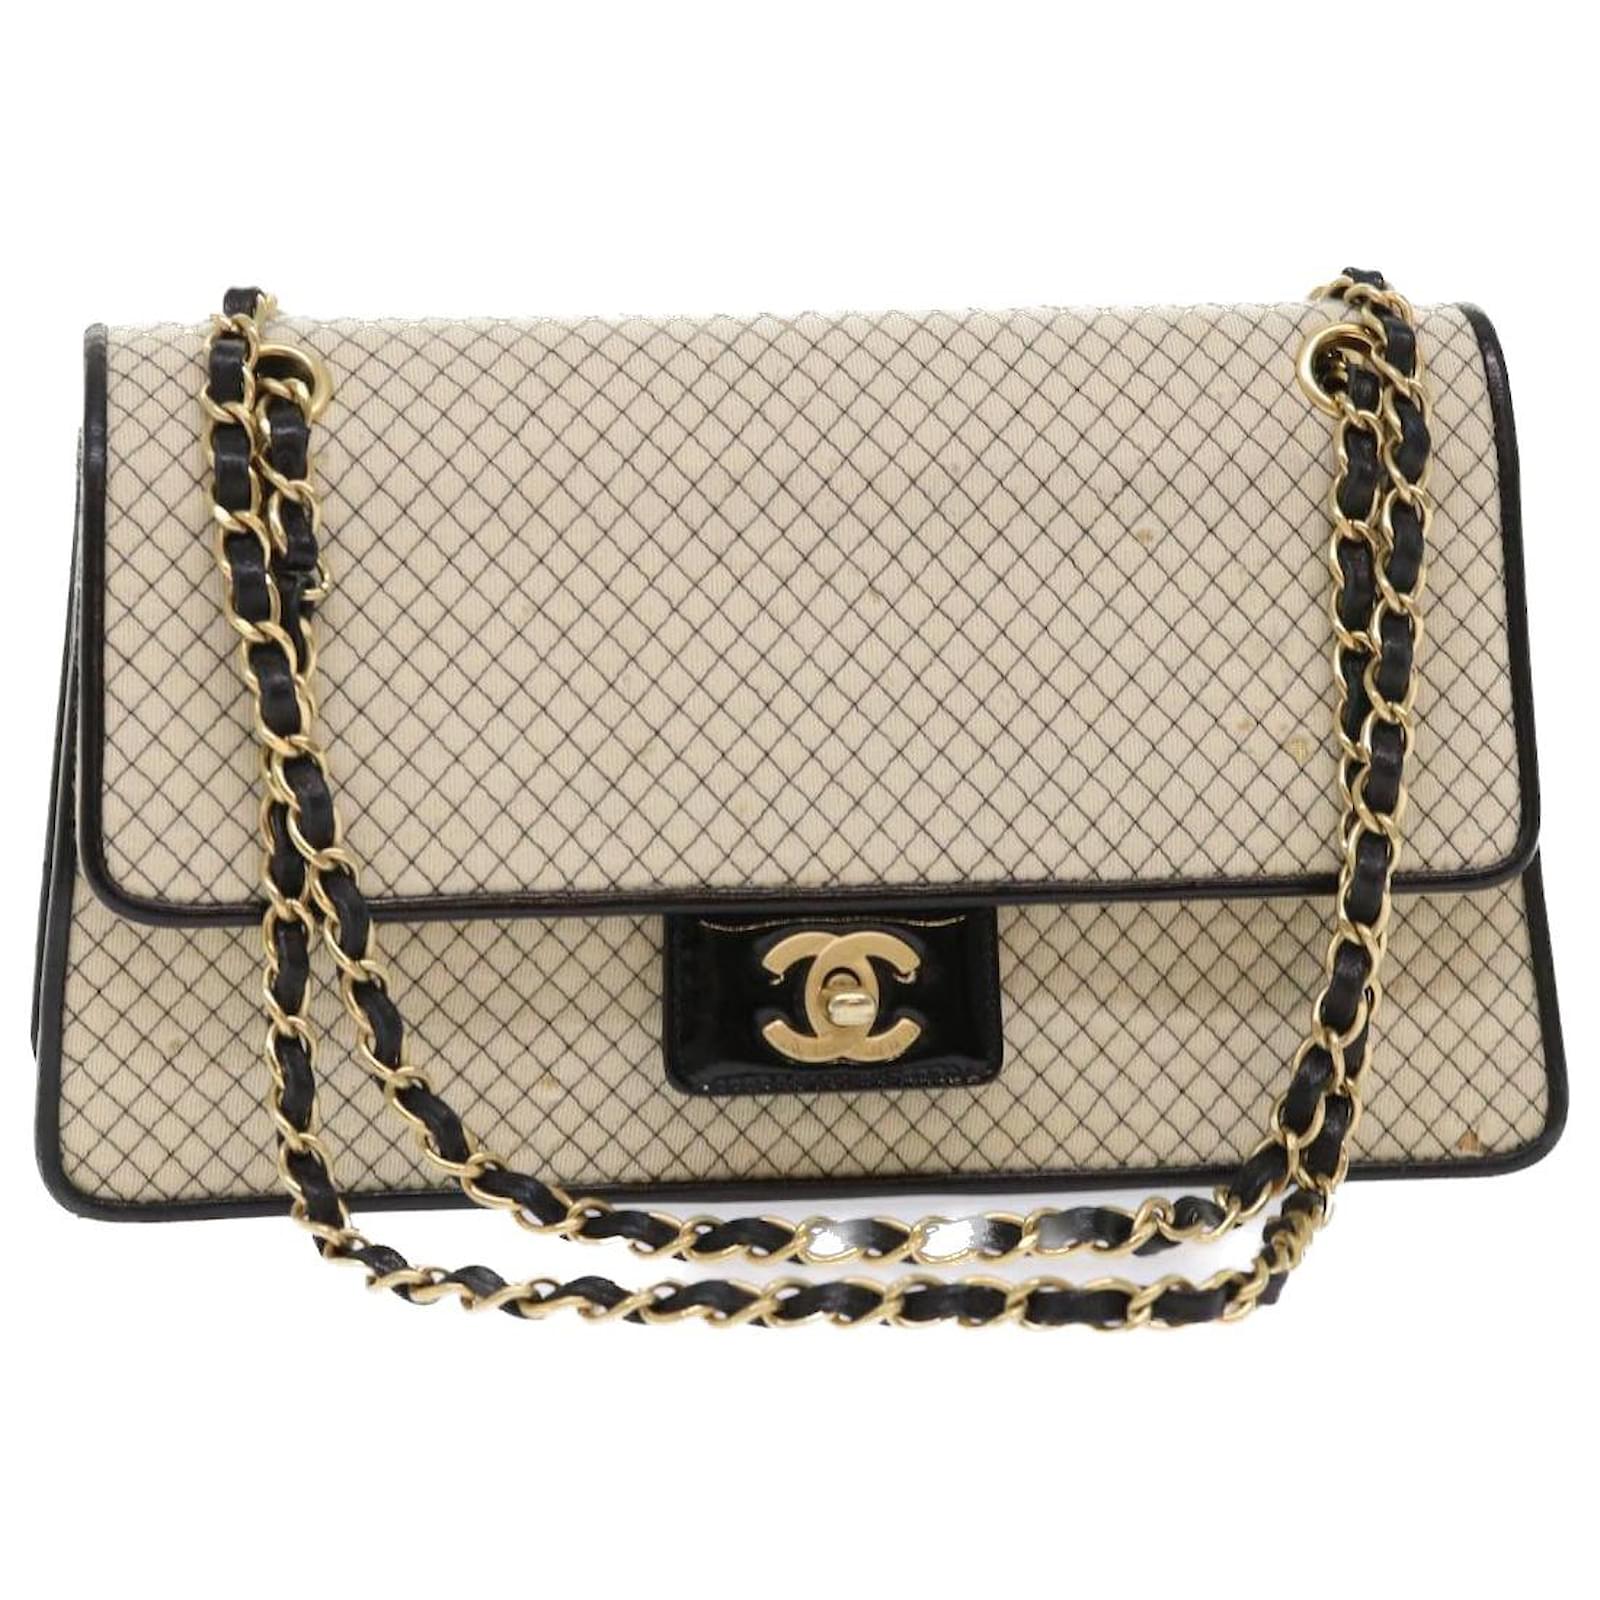 Chanel Black Quilted Lambskin Mini Flap Messenger With Top Chain